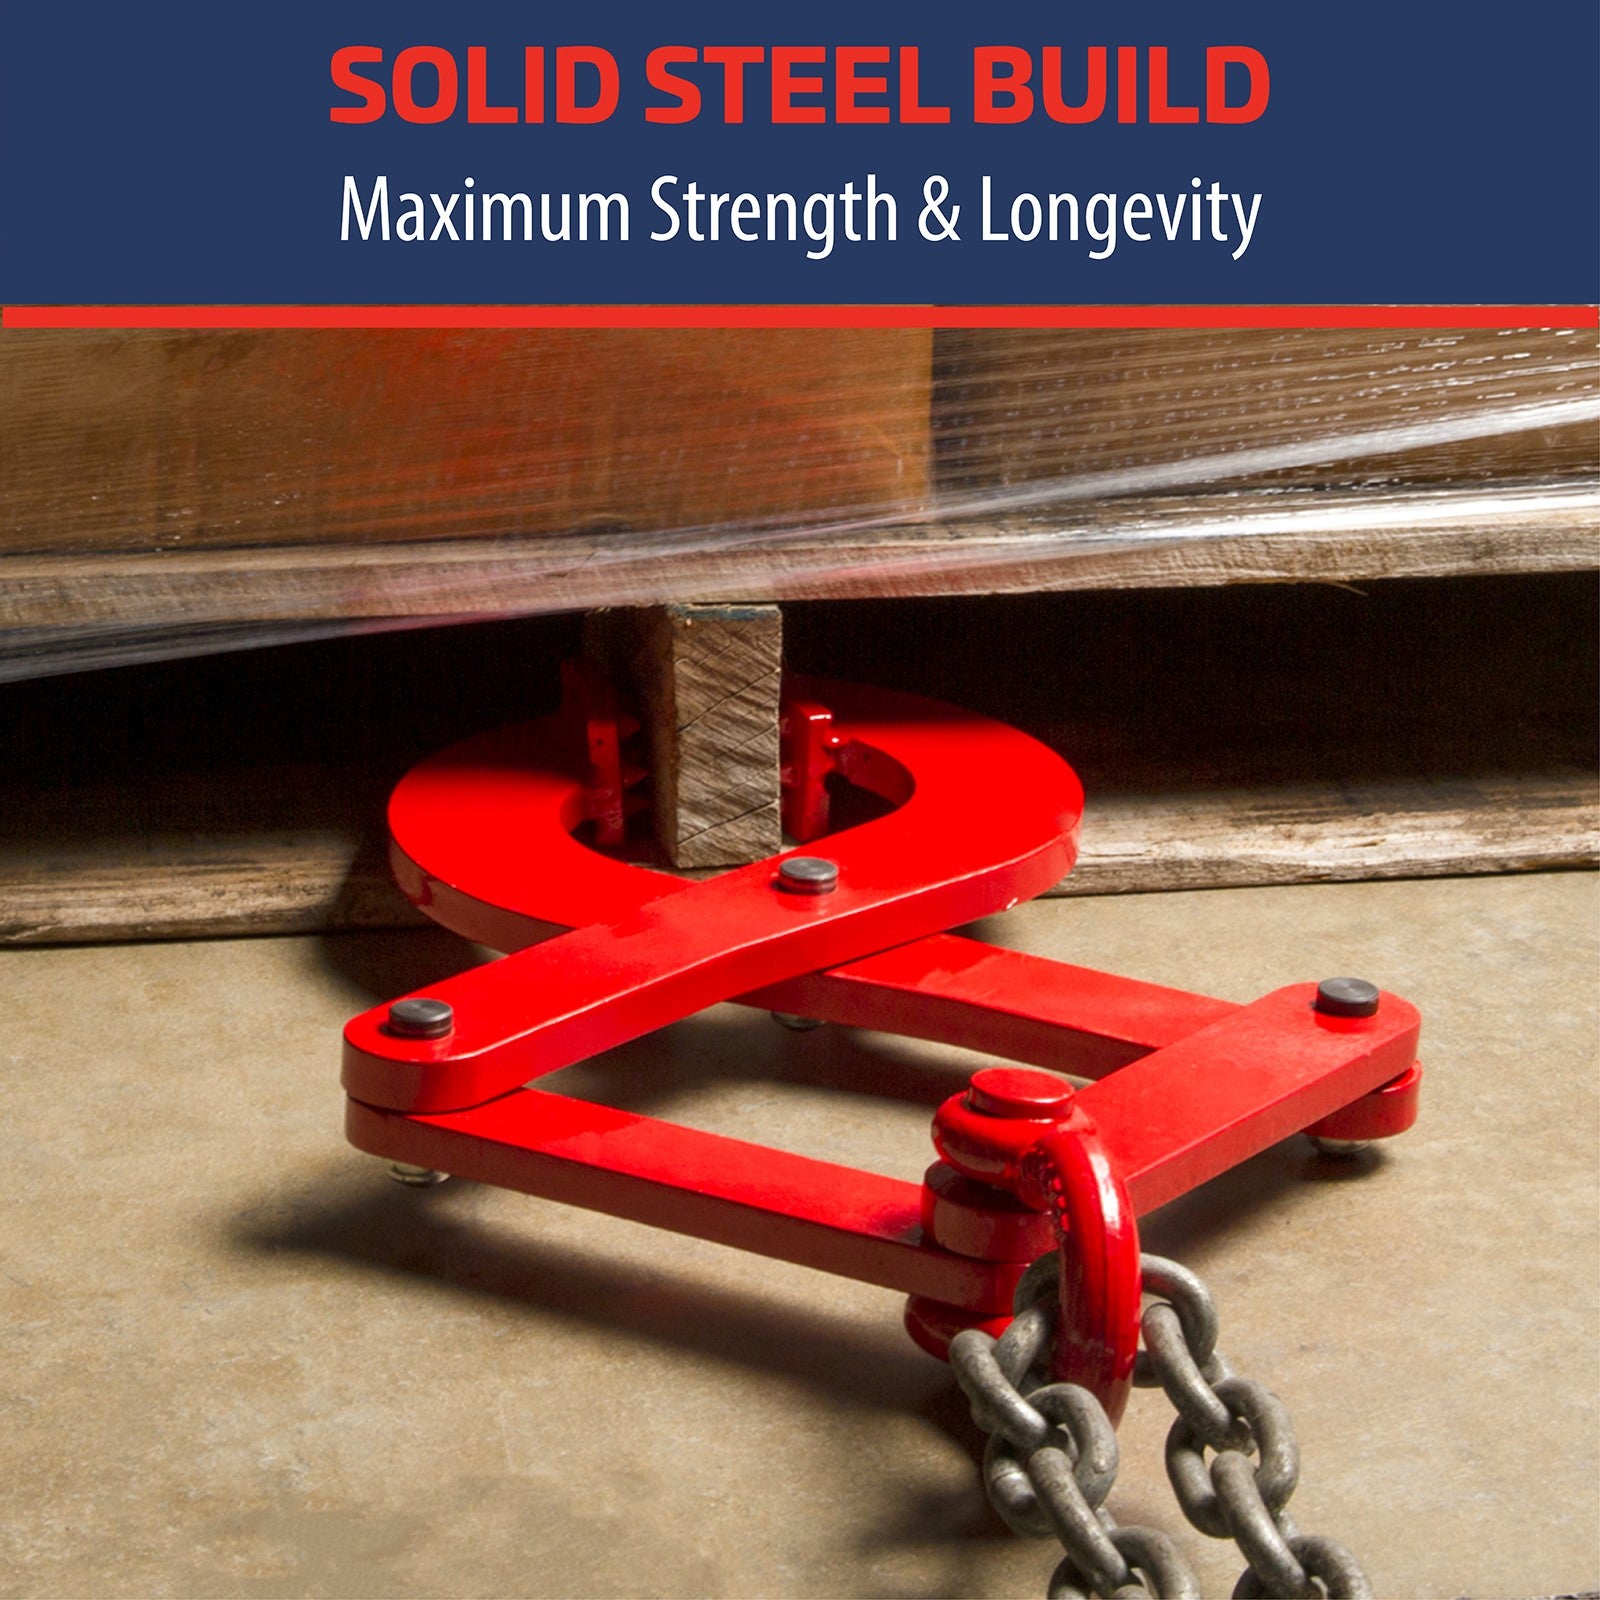 JORES TECHNOLOGIES® pallet clamp pulling a heavy pallet with a chain looped through the pallet puller. Top blue banner with red and white text that states: solid steel build, maximum strength & longevity.